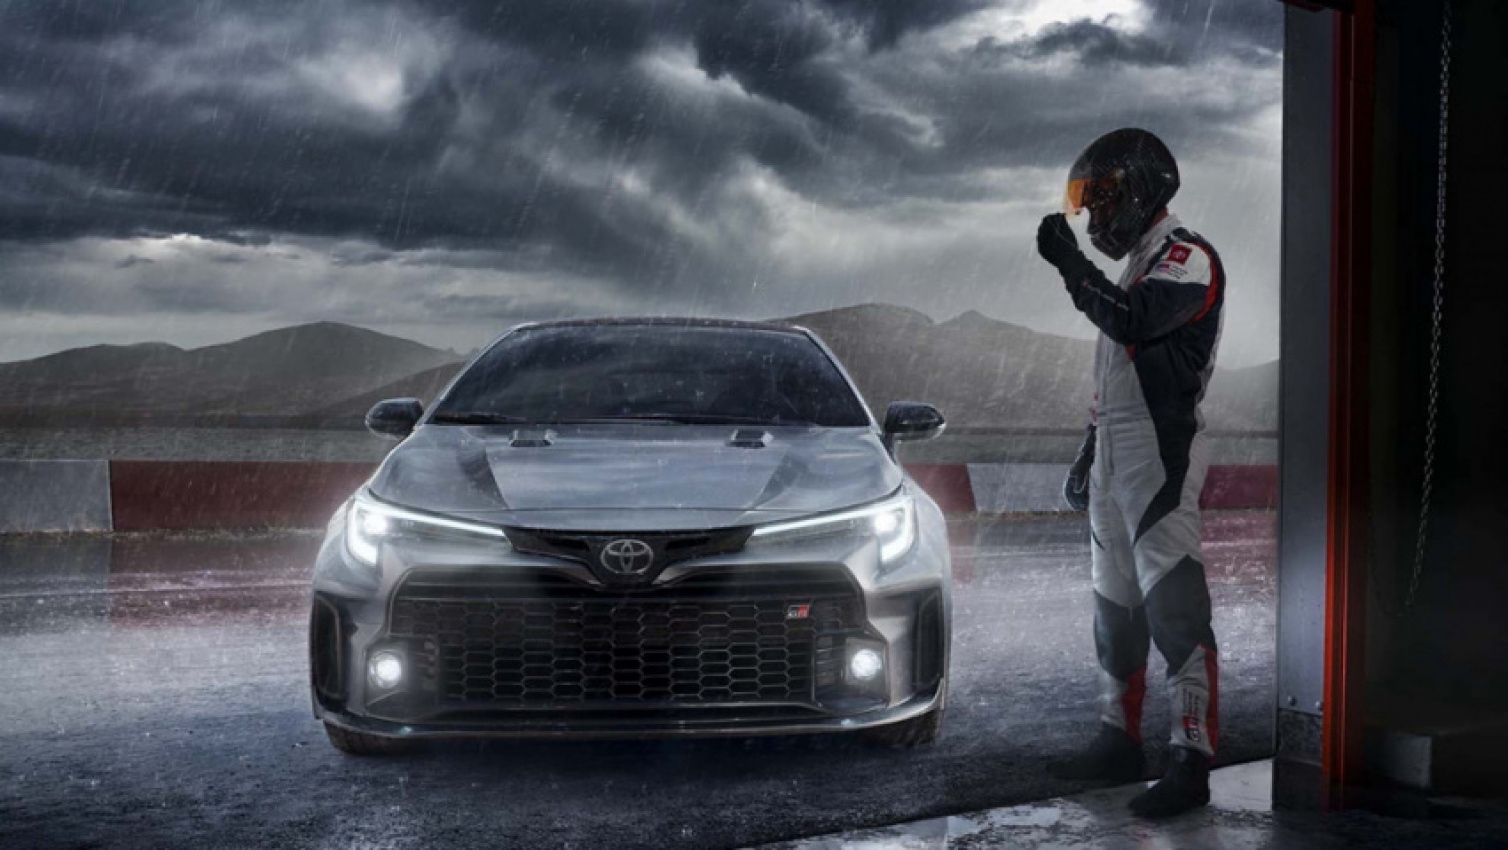 autos, cars, hp, toyota, breaking, hatchbacks, news, performance, toyota corolla news, toyota news, videos, youtube, 2023 toyota gr corolla leaked: hot hatch promises 300 hp, 6-speed manual, and awd